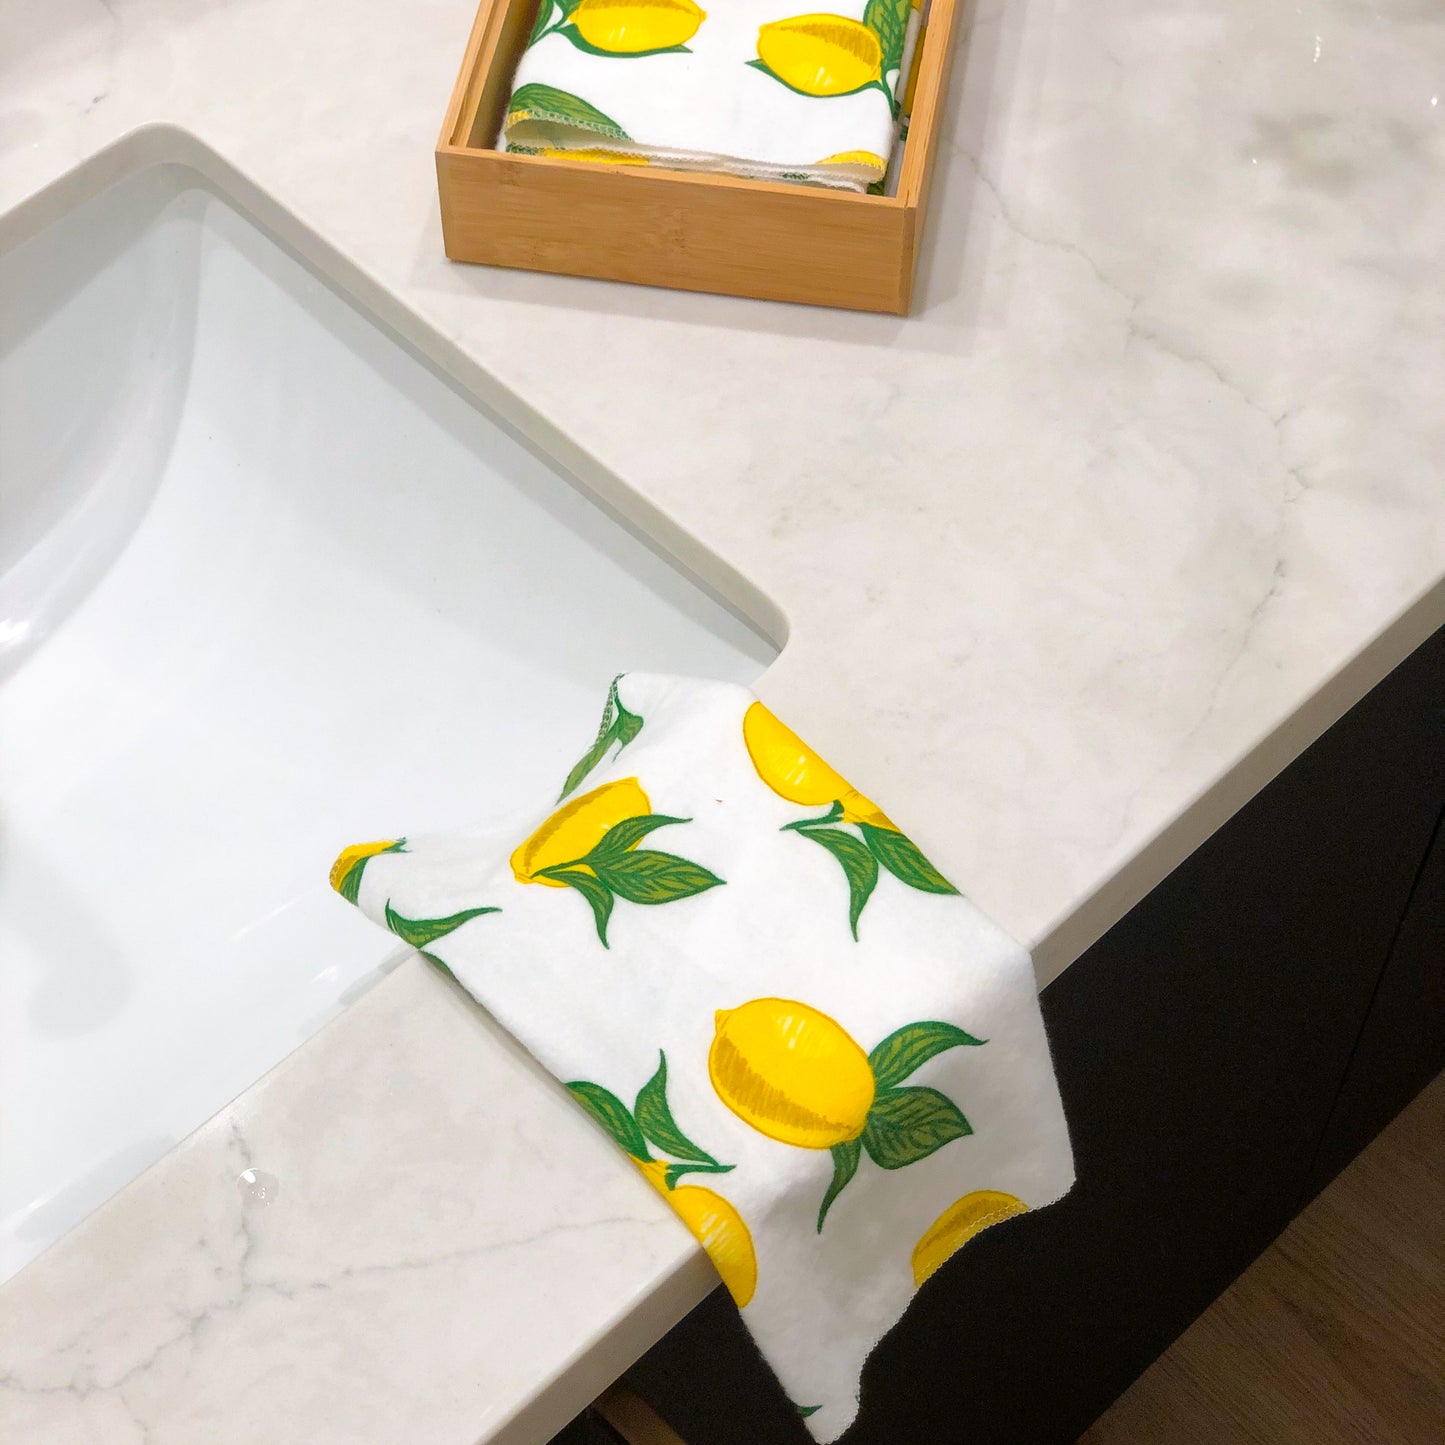 Earthly Co. Reusable & Washable Paper Towels replace more than 80 rolls of paper  towels » Gadget Flow